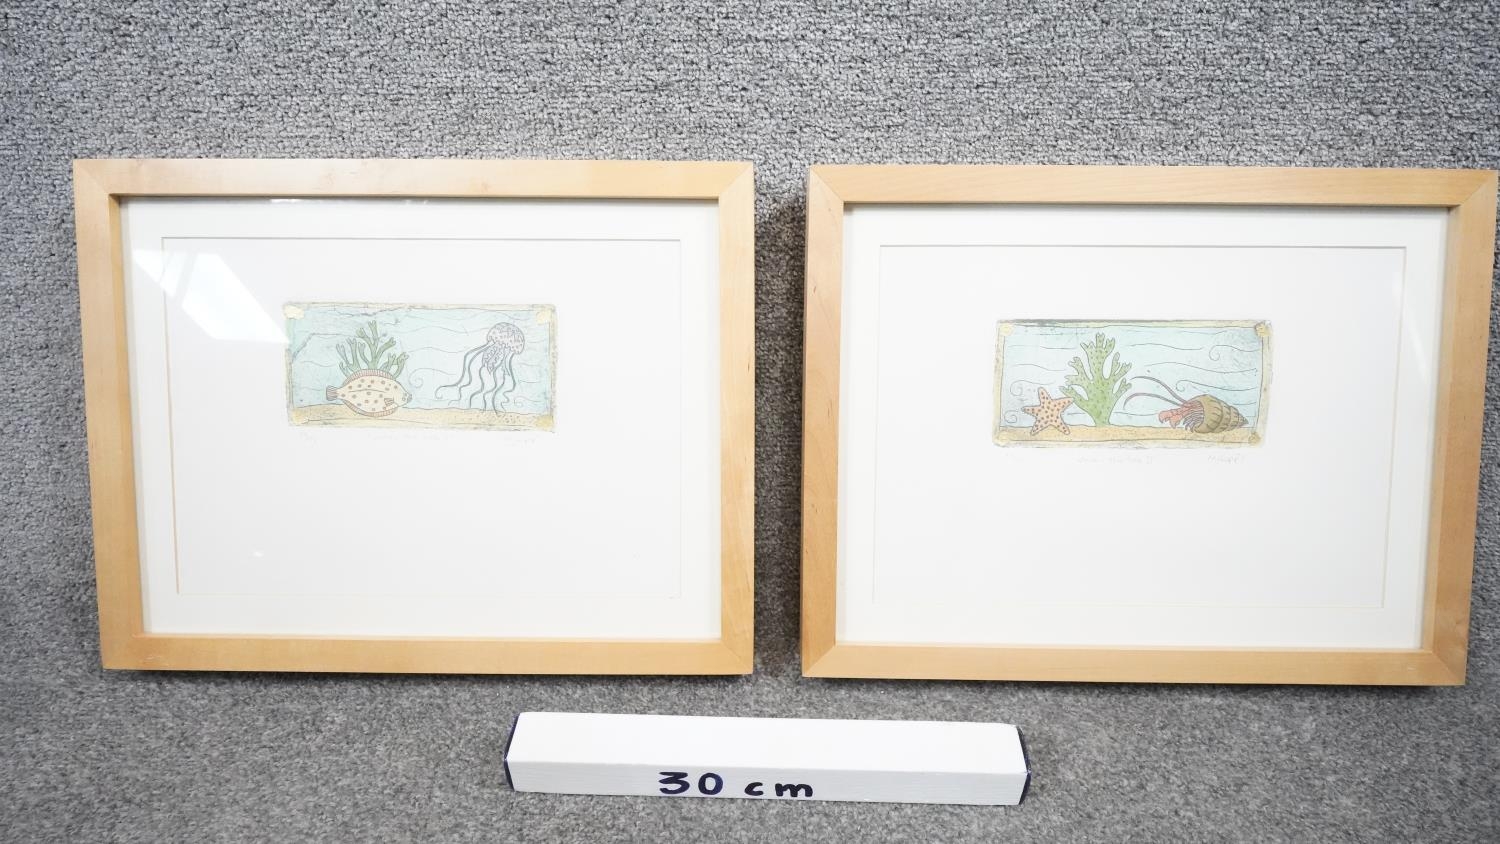 Two framed and glazed signed limited edition sea life prints signed M. J. Epps. One of a starfish - Image 8 of 8